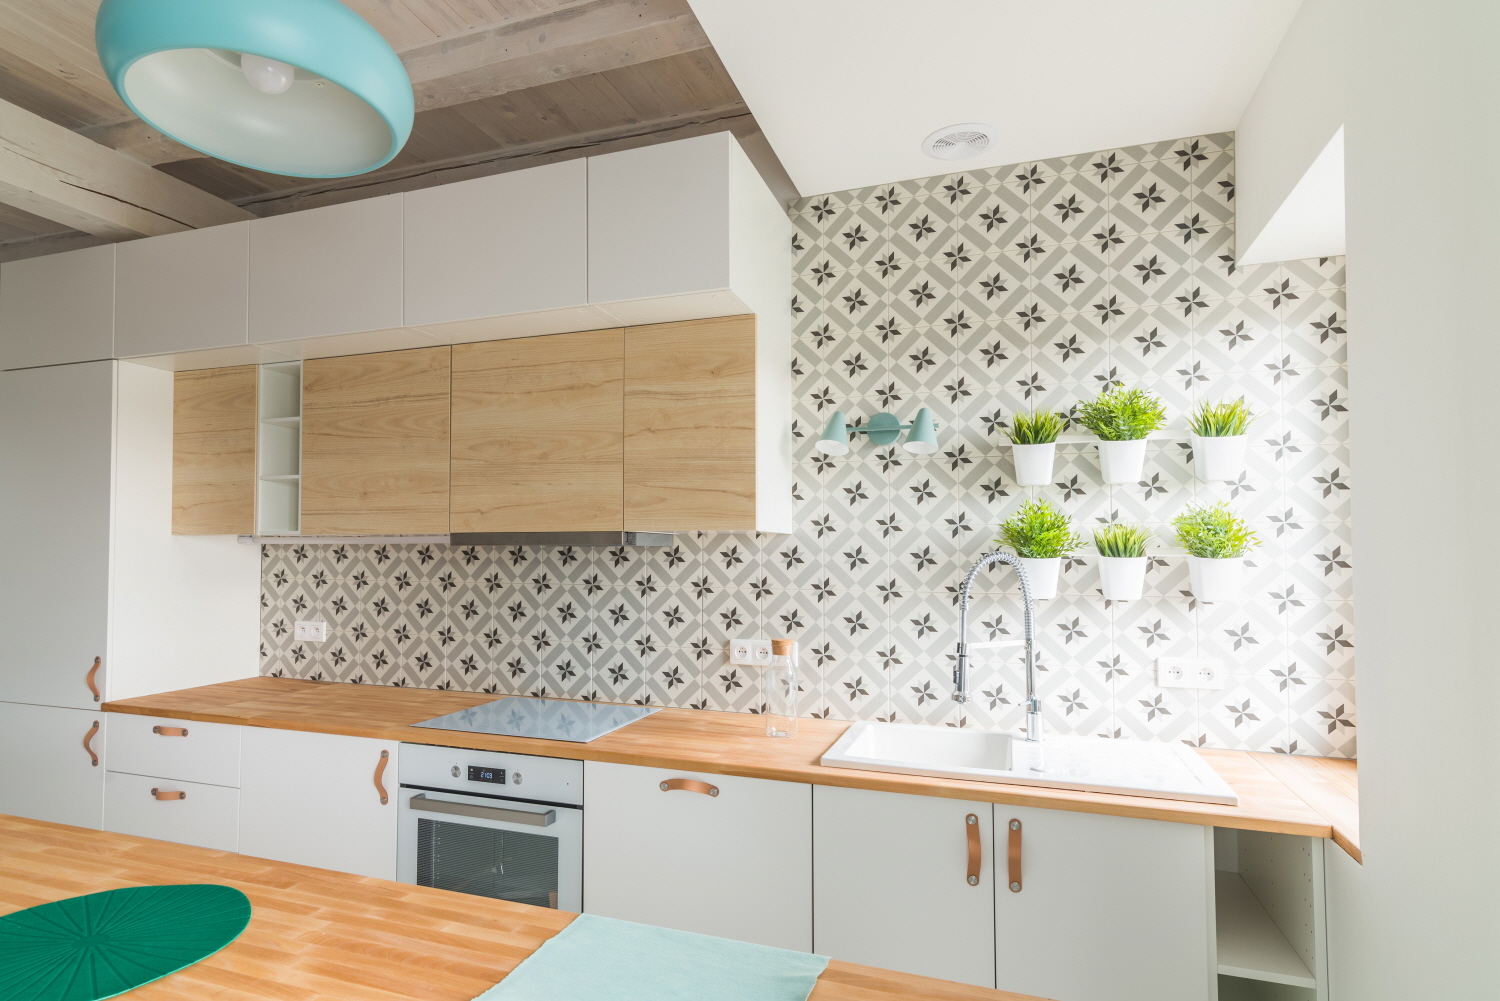 Elevate your small kitchen with bold wallpaper for added depth and focal interest.